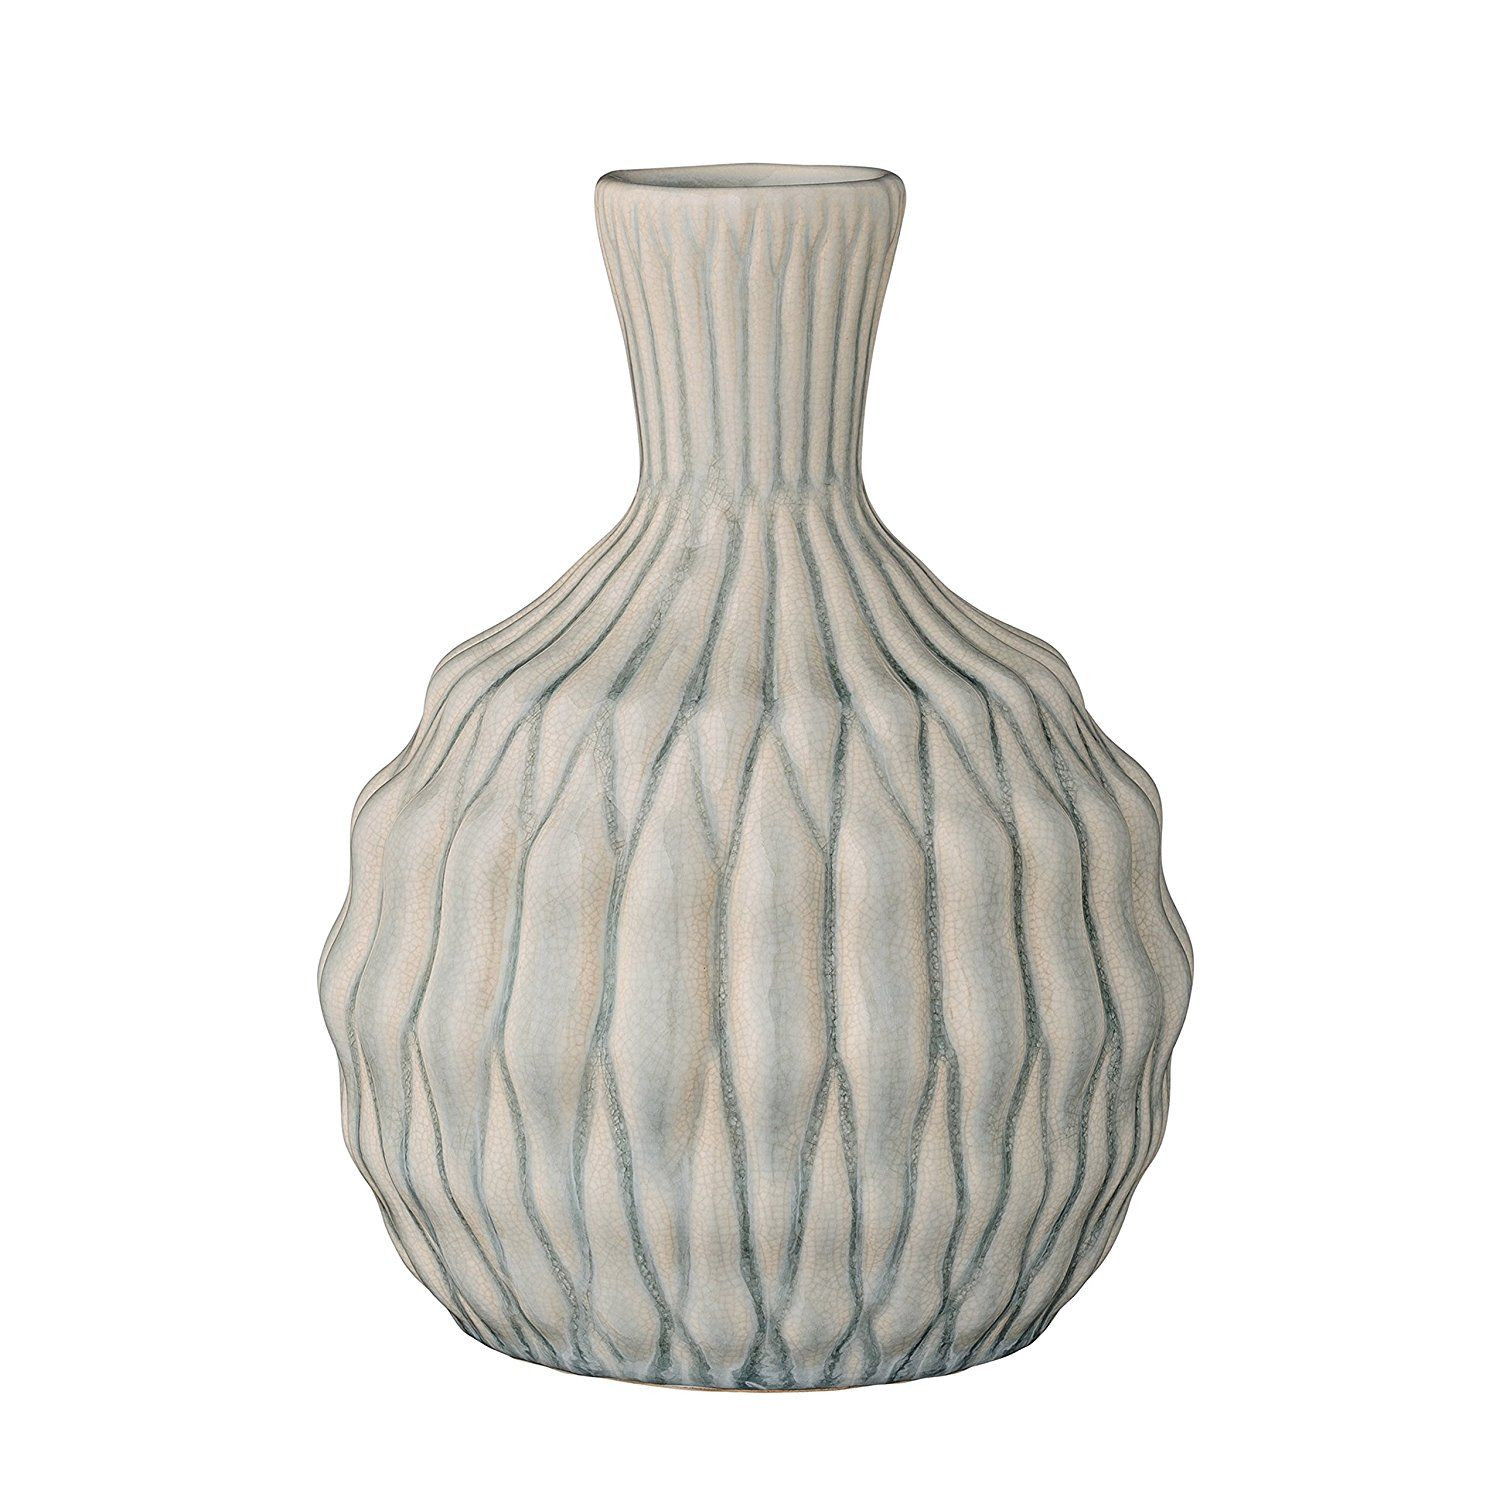 15 Stylish Bamboo Vases for Sale 2024 free download bamboo vases for sale of short winter blue ceramic vase you can get more details by in short winter blue ceramic vase you can get more details by clicking on